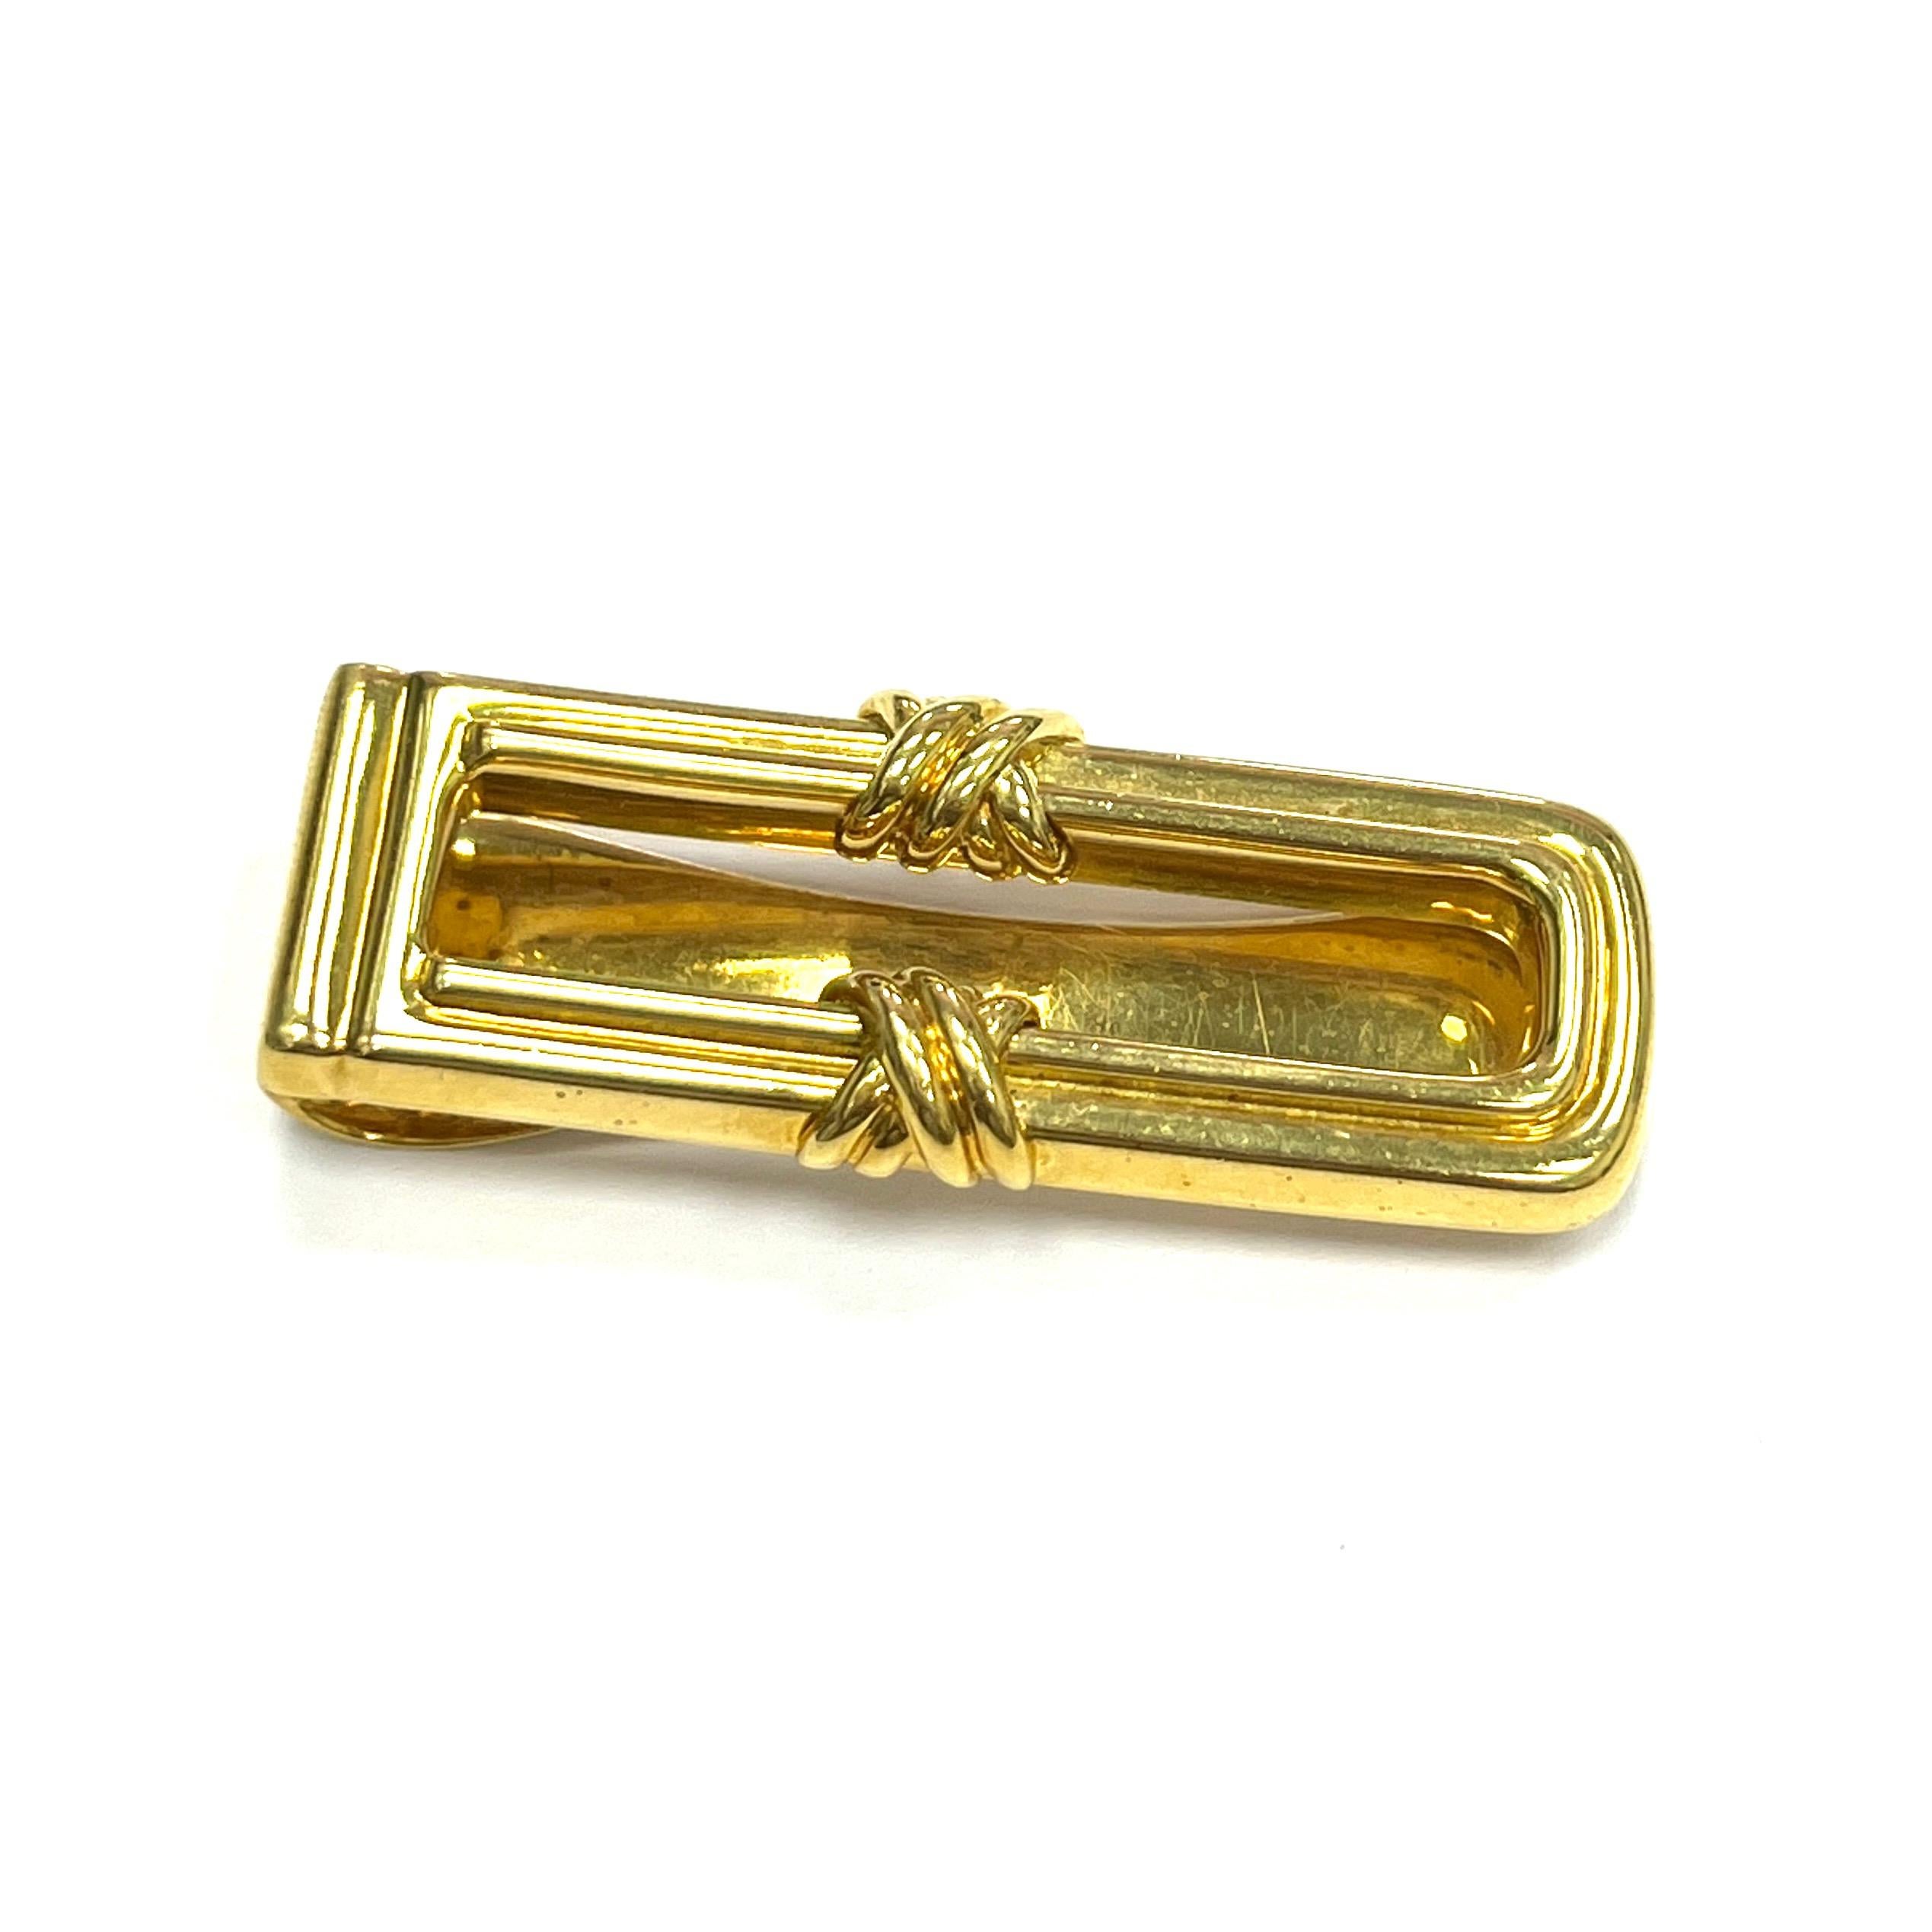 Tiffany & Co. gold money clip, 1992

18 karat yellow gold, featuring a knot on both sides; marked Tiffany & Co., 1992, 750

Size: width 2 cm, length 5 cm
Total weight: 27.4 grams